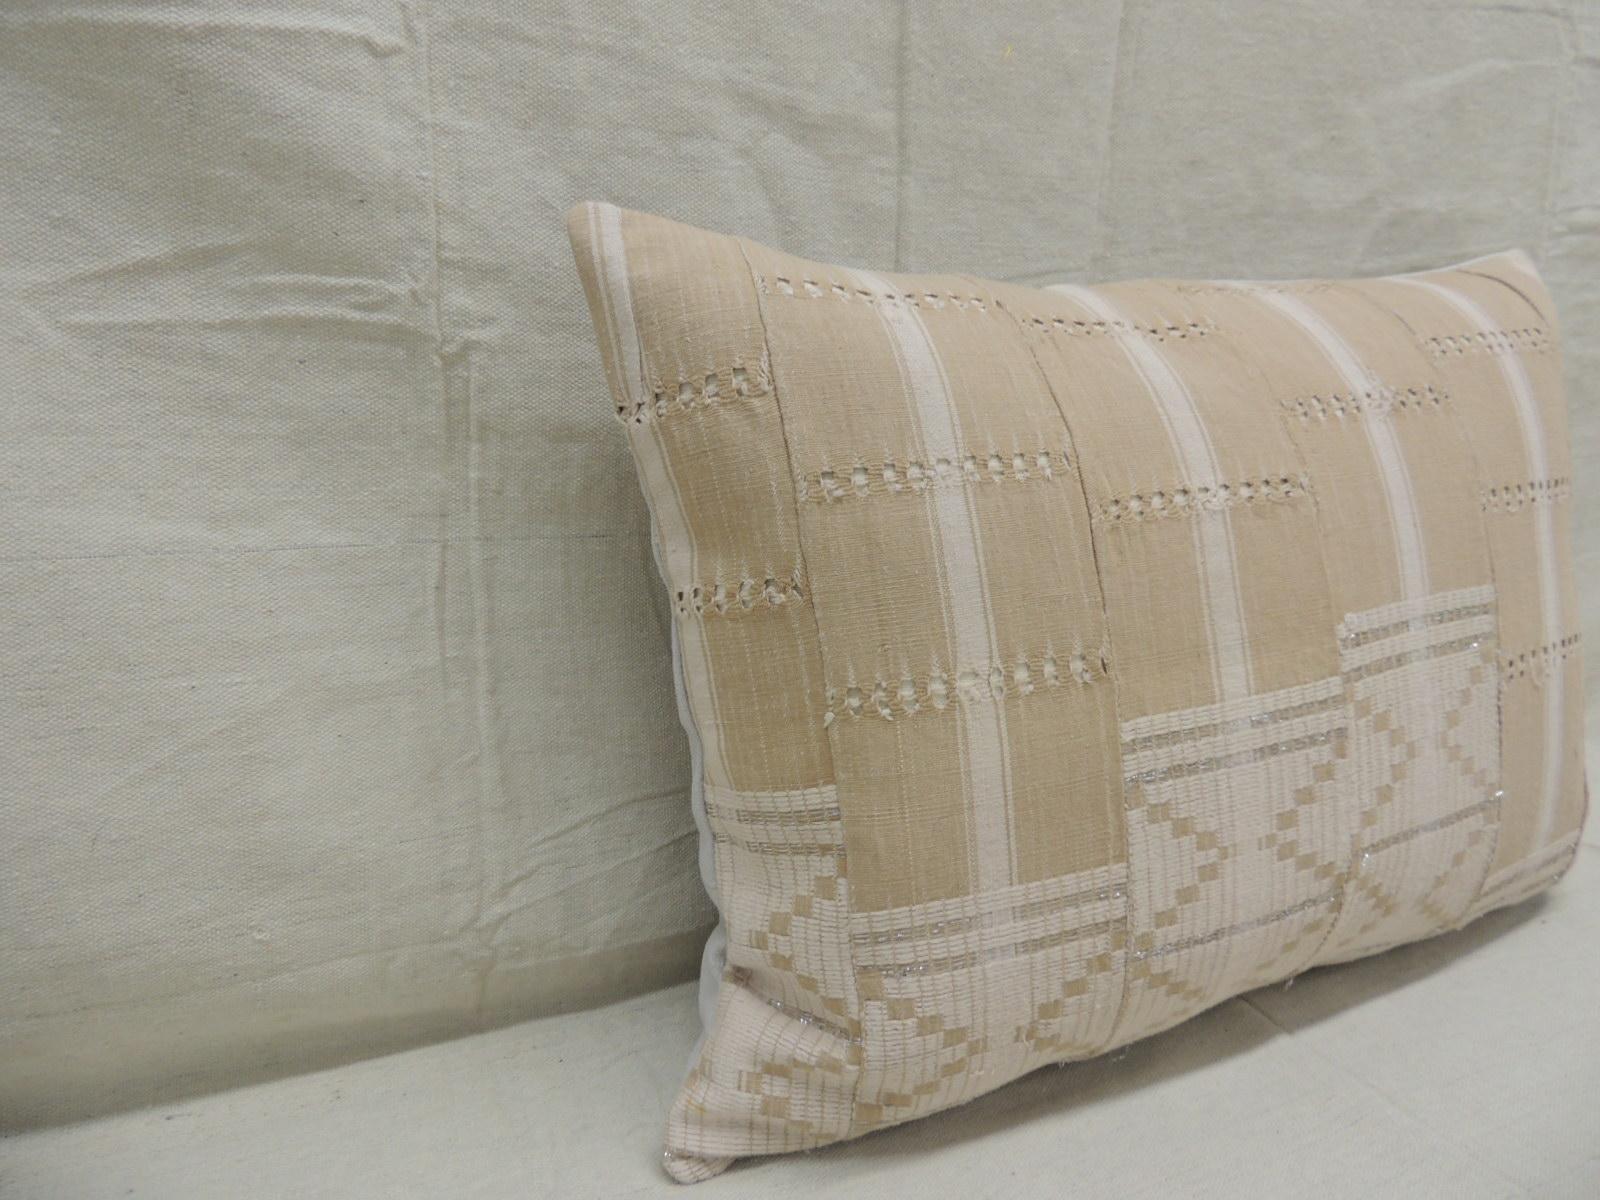 Vintage tan and brown woven ewe stripweaves and white embroidery African long bolster
decorative pillow with silver embroidered metallic threads.
with textured grey cotton backing.
Decorative pillow handcrafted and designed in the USA.
Closure